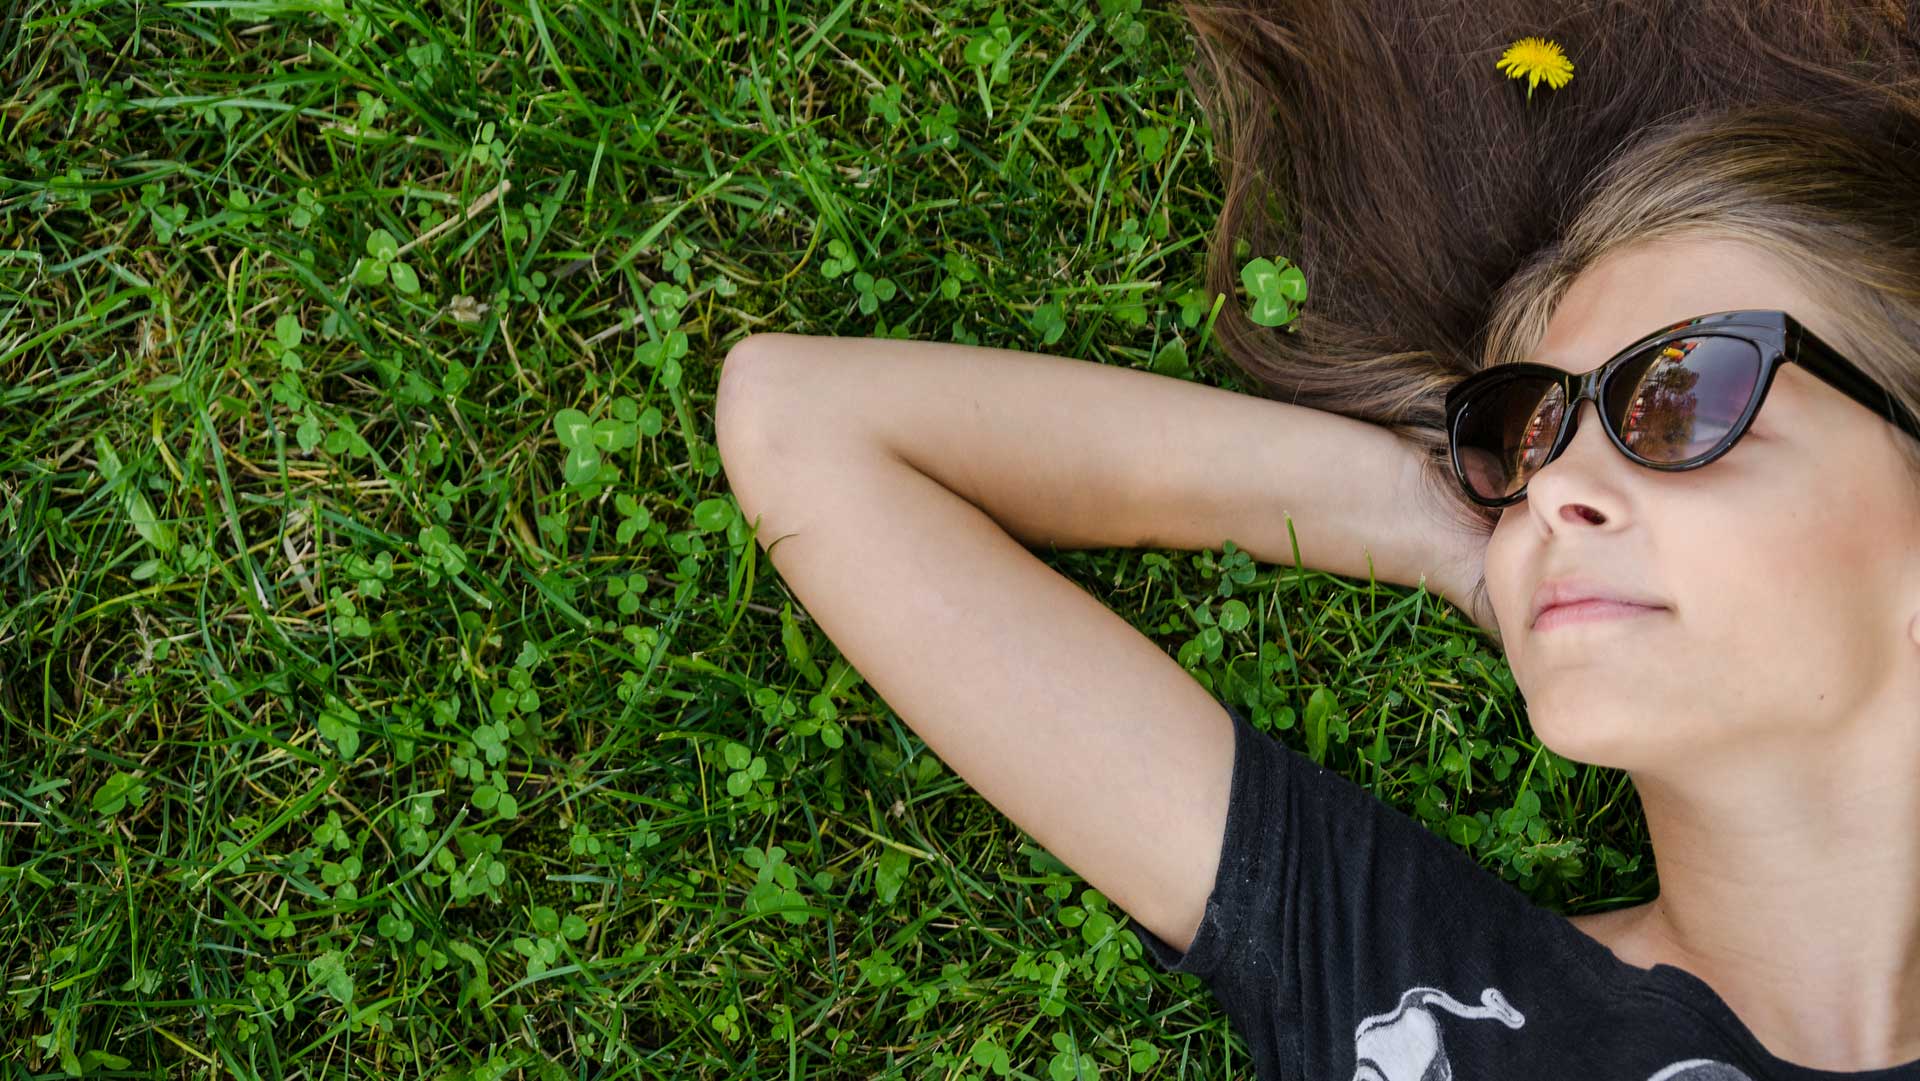 Teenage girl laying in the grass wearing sunglasses and smiling